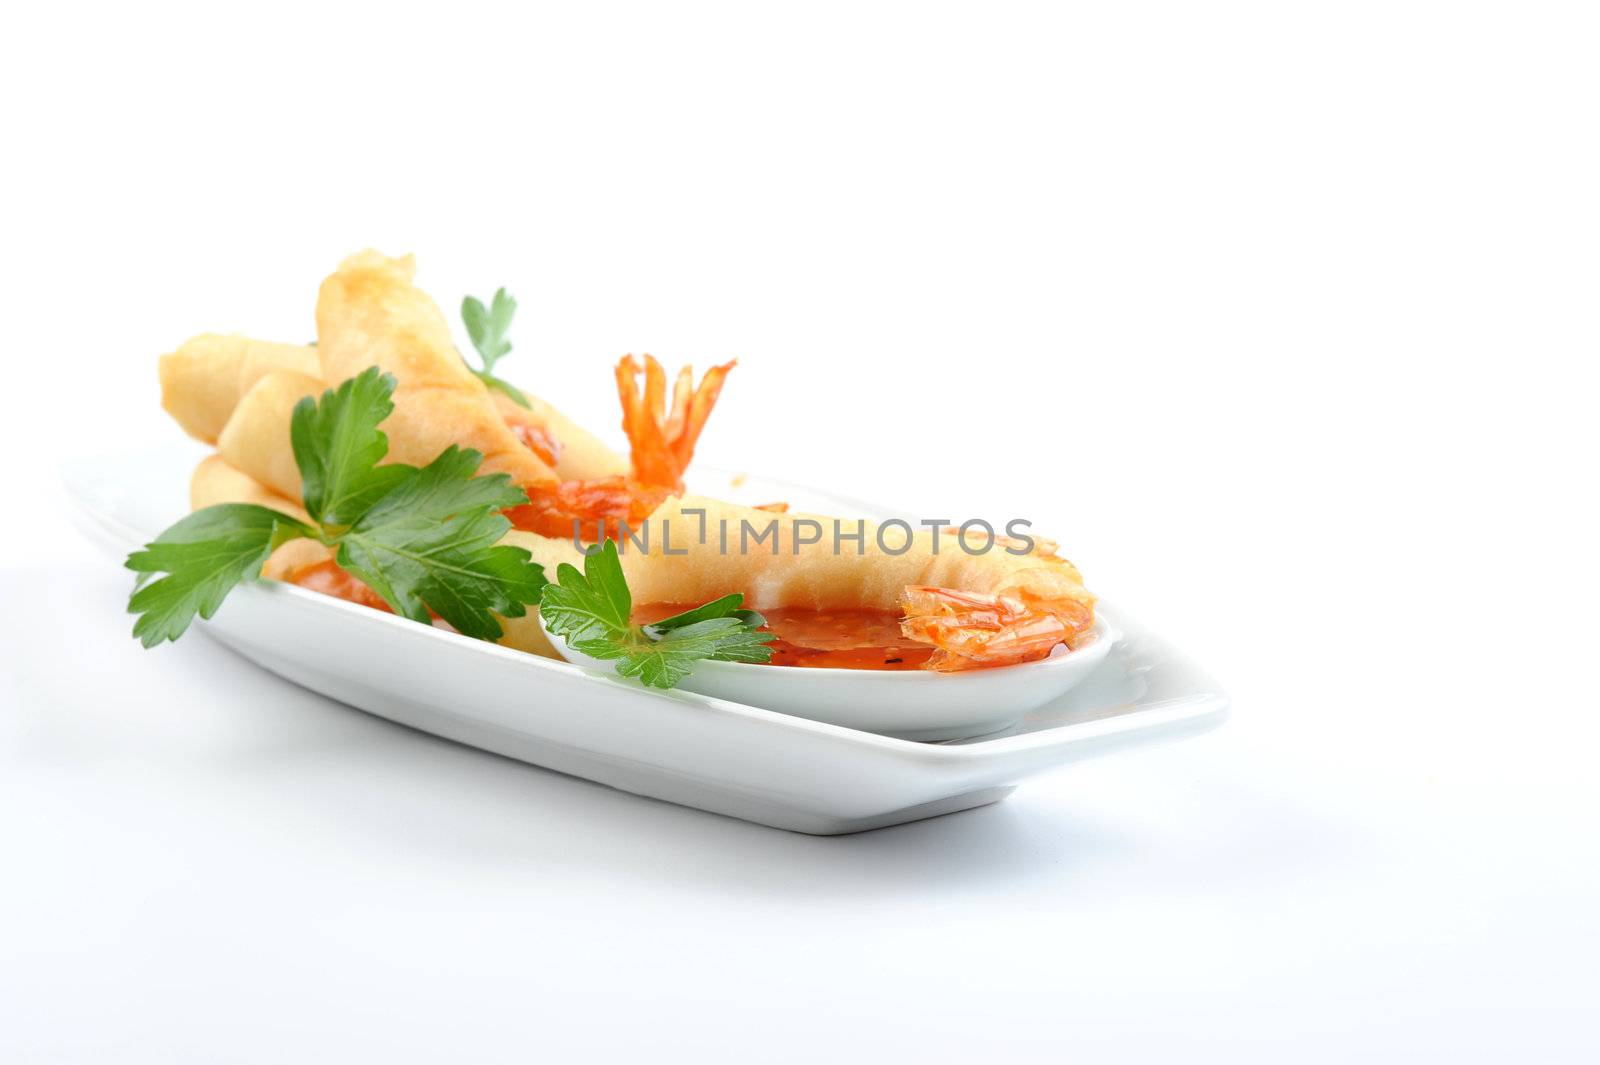 Fried Shrimp by billberryphotography